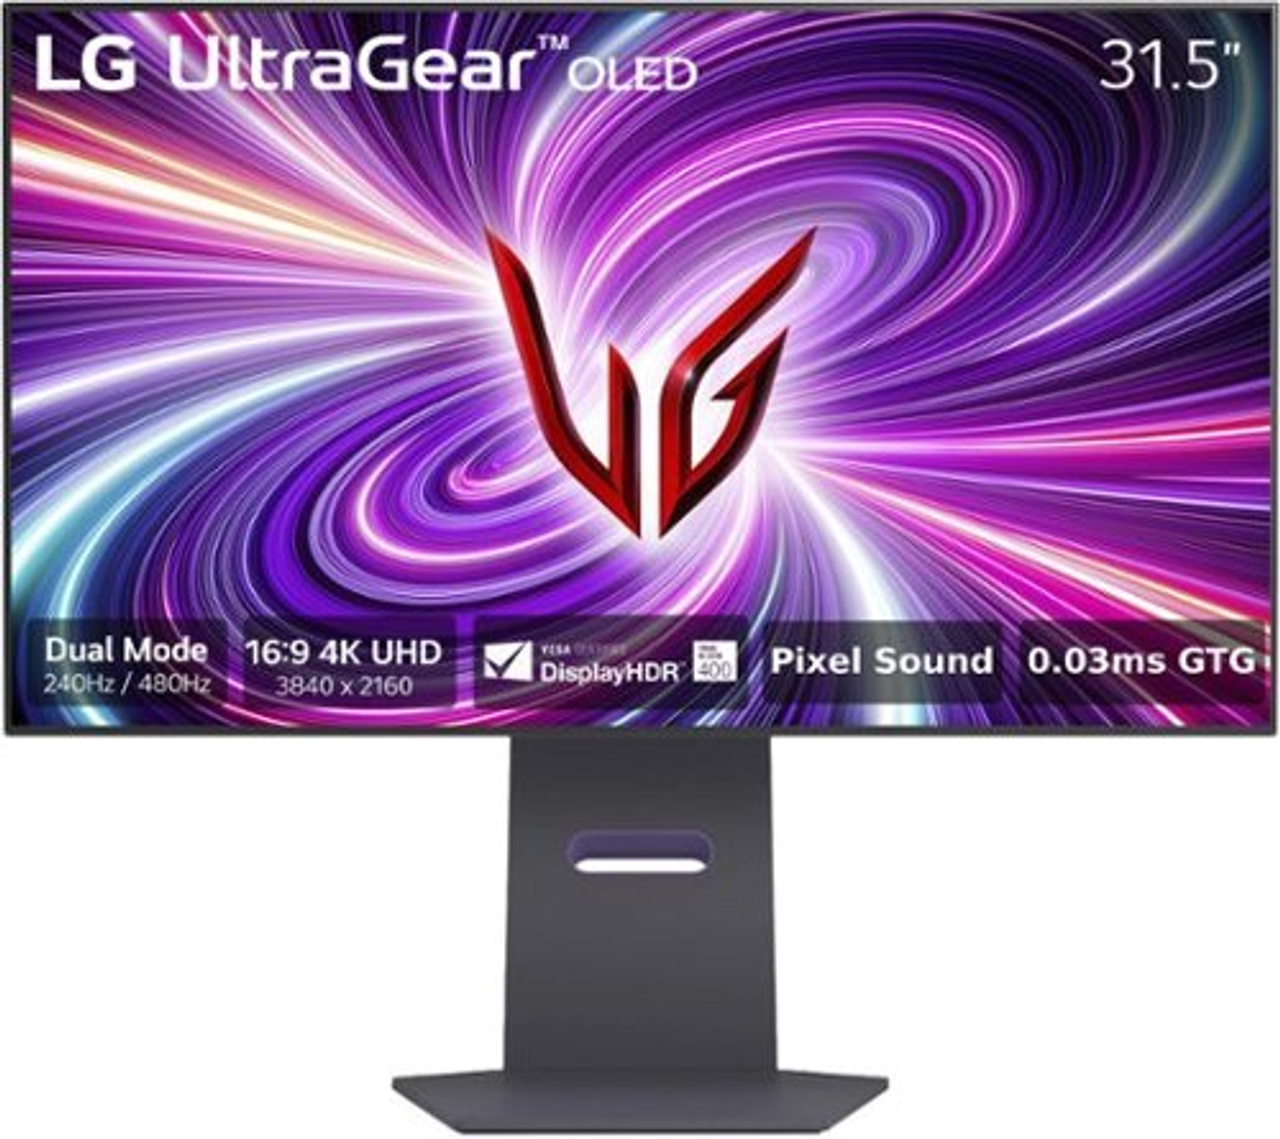 LG - UltraGear 32" OLED UHD 240Hz 0.03ms NVIDIA G-SYNC Compatible and AMD Freesync Premium Pro Gaming Monitor with HDR - Black